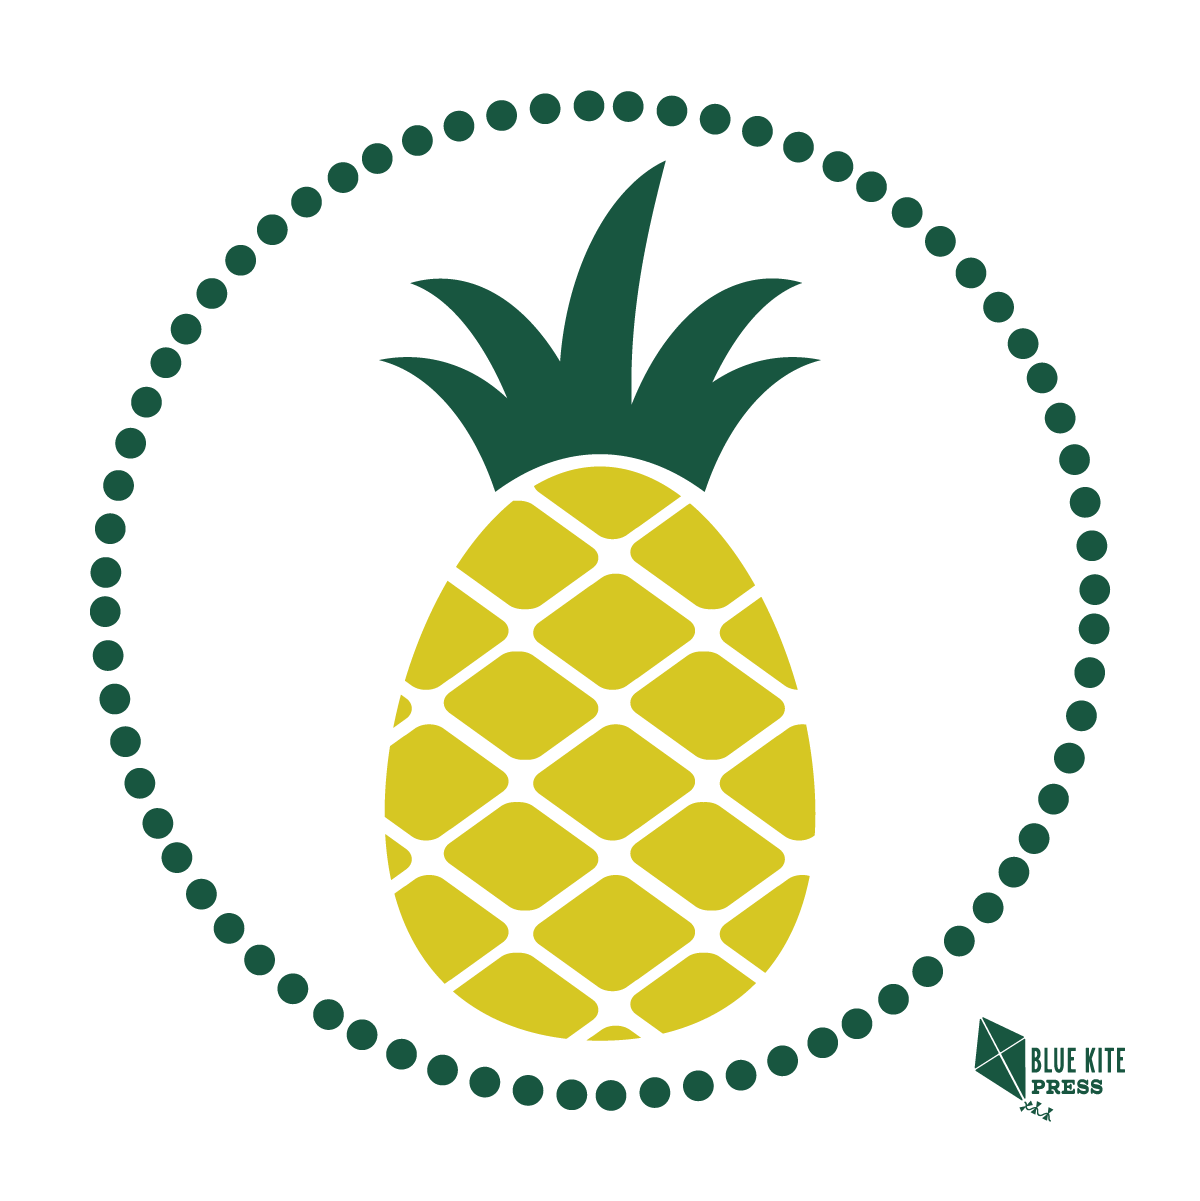 Pineapple collection from Blue Kite Press. A vibrant pineapple illustration to symbolize hospitality, warmth, and welcoming. 